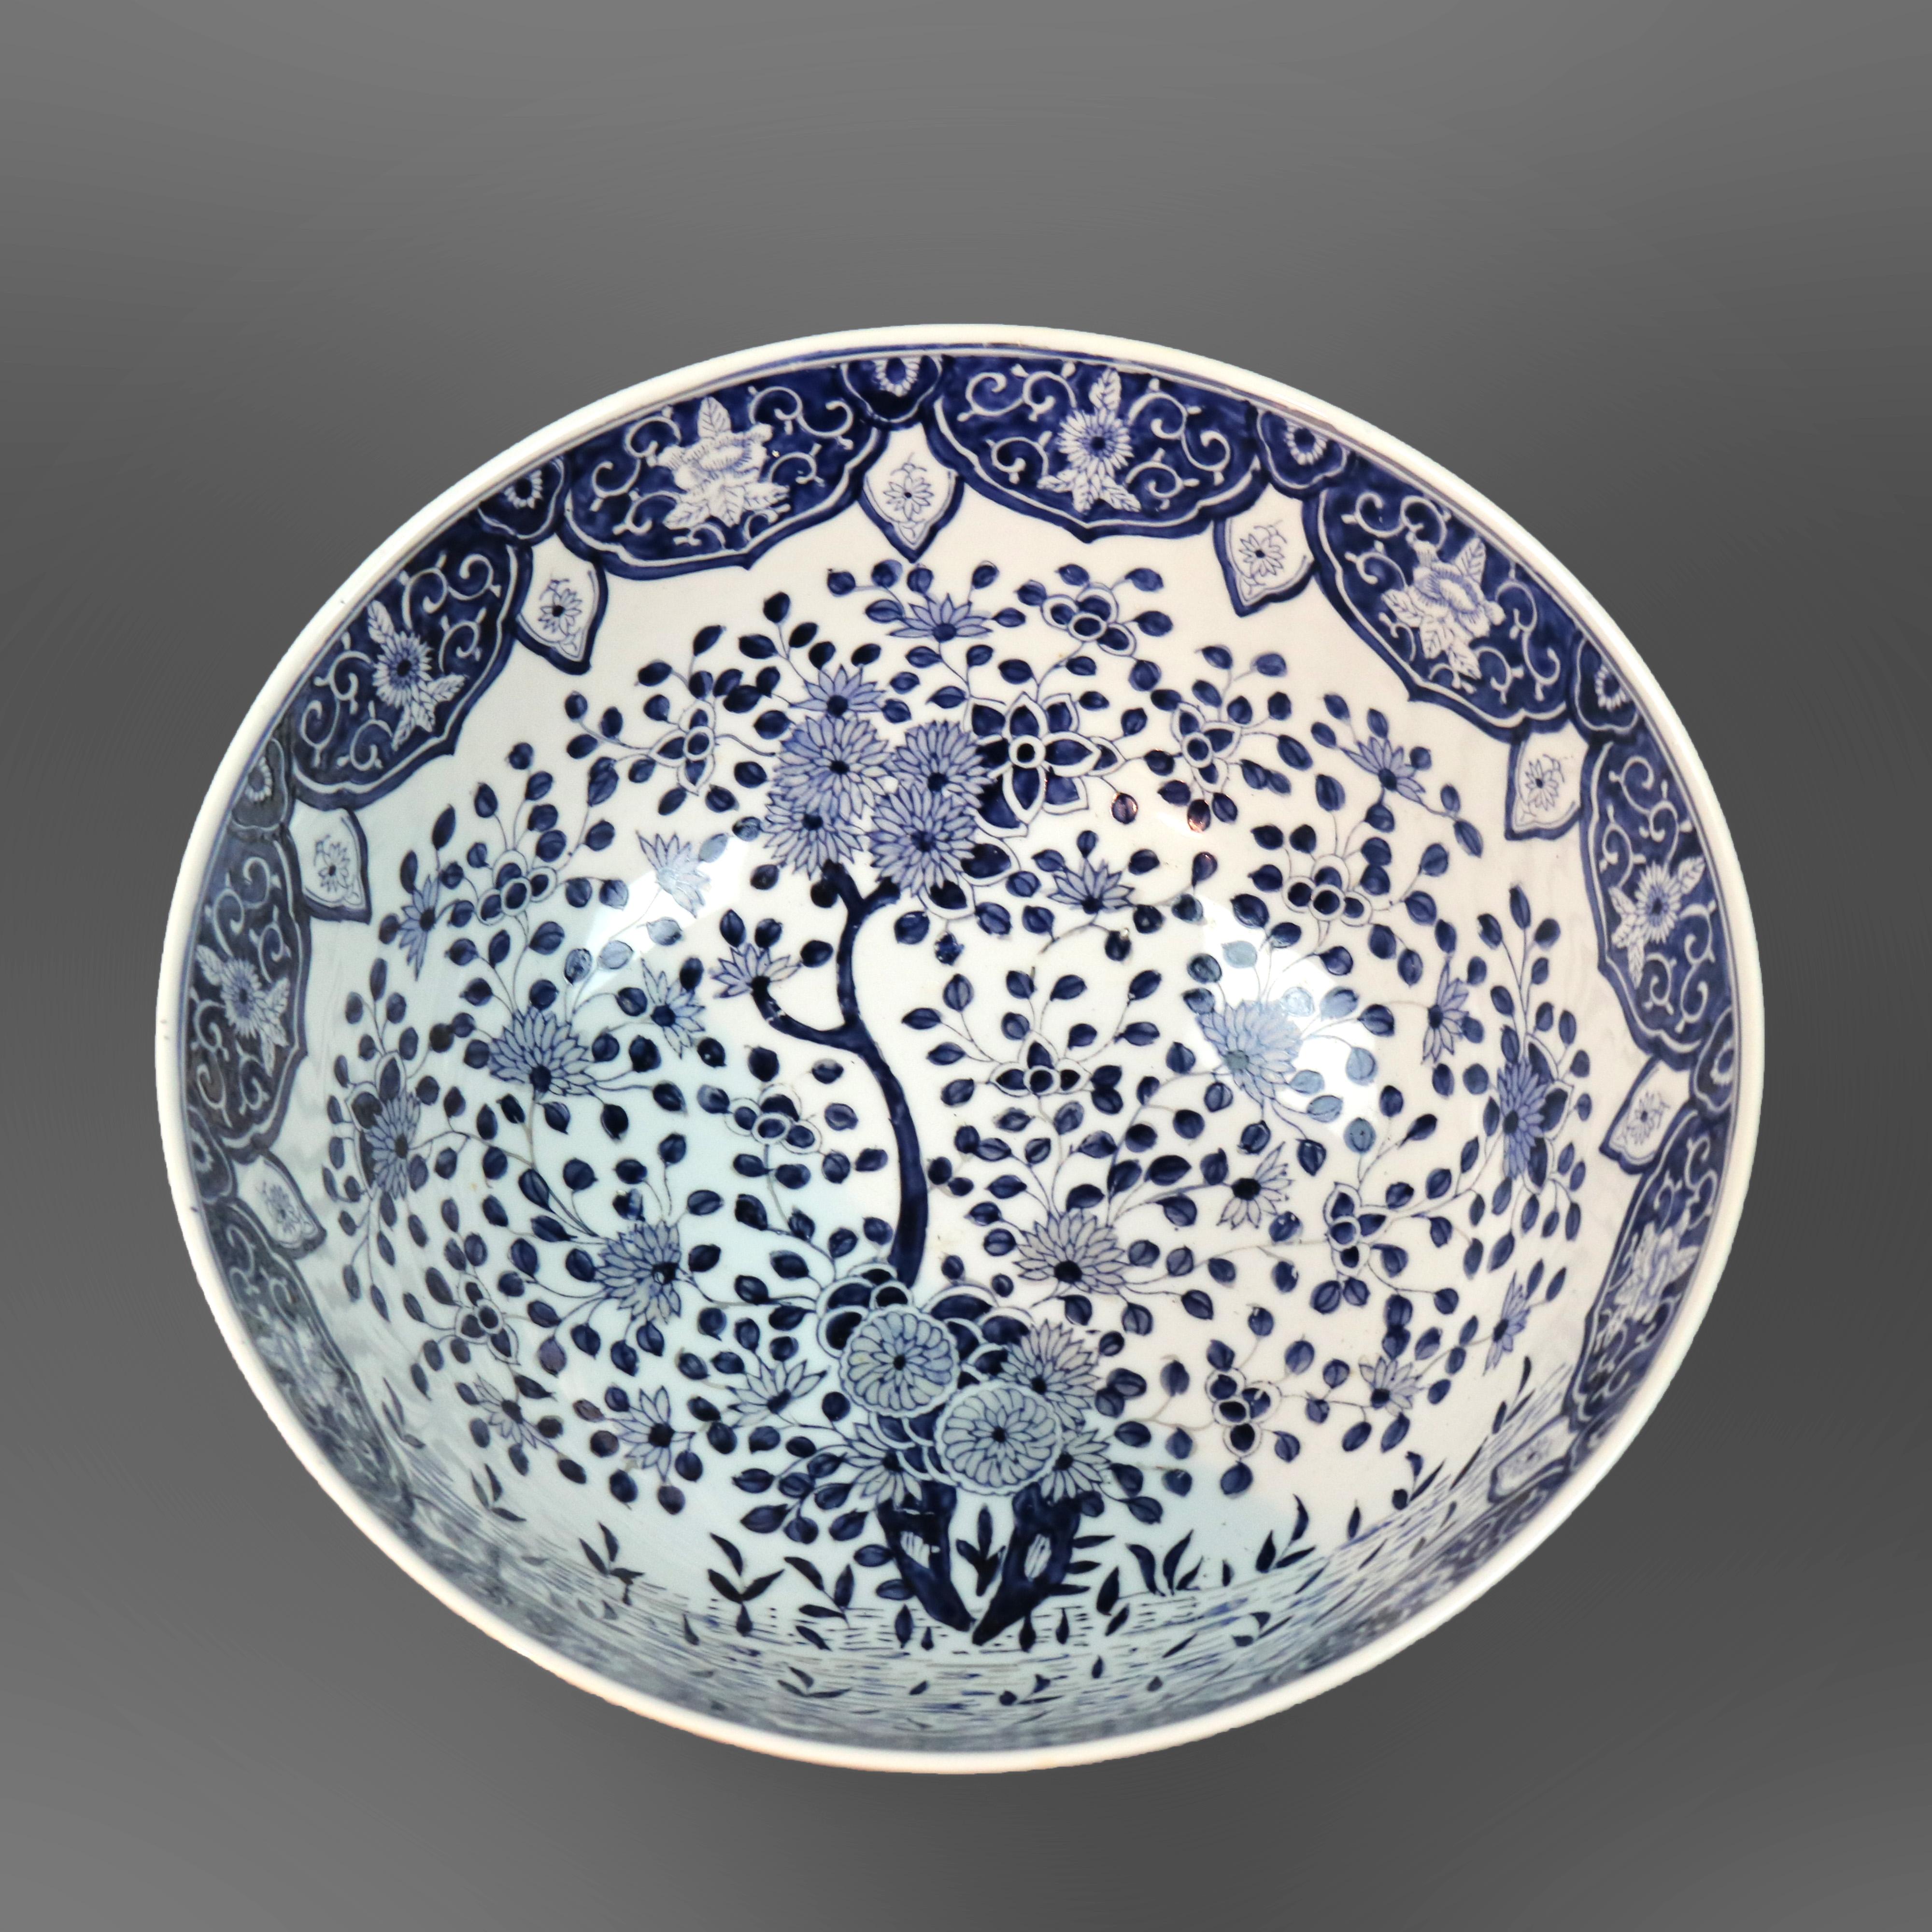 Carved Antique Blue and White Japanese Porcelain Bowl with Hardwood Stand, 20th Century